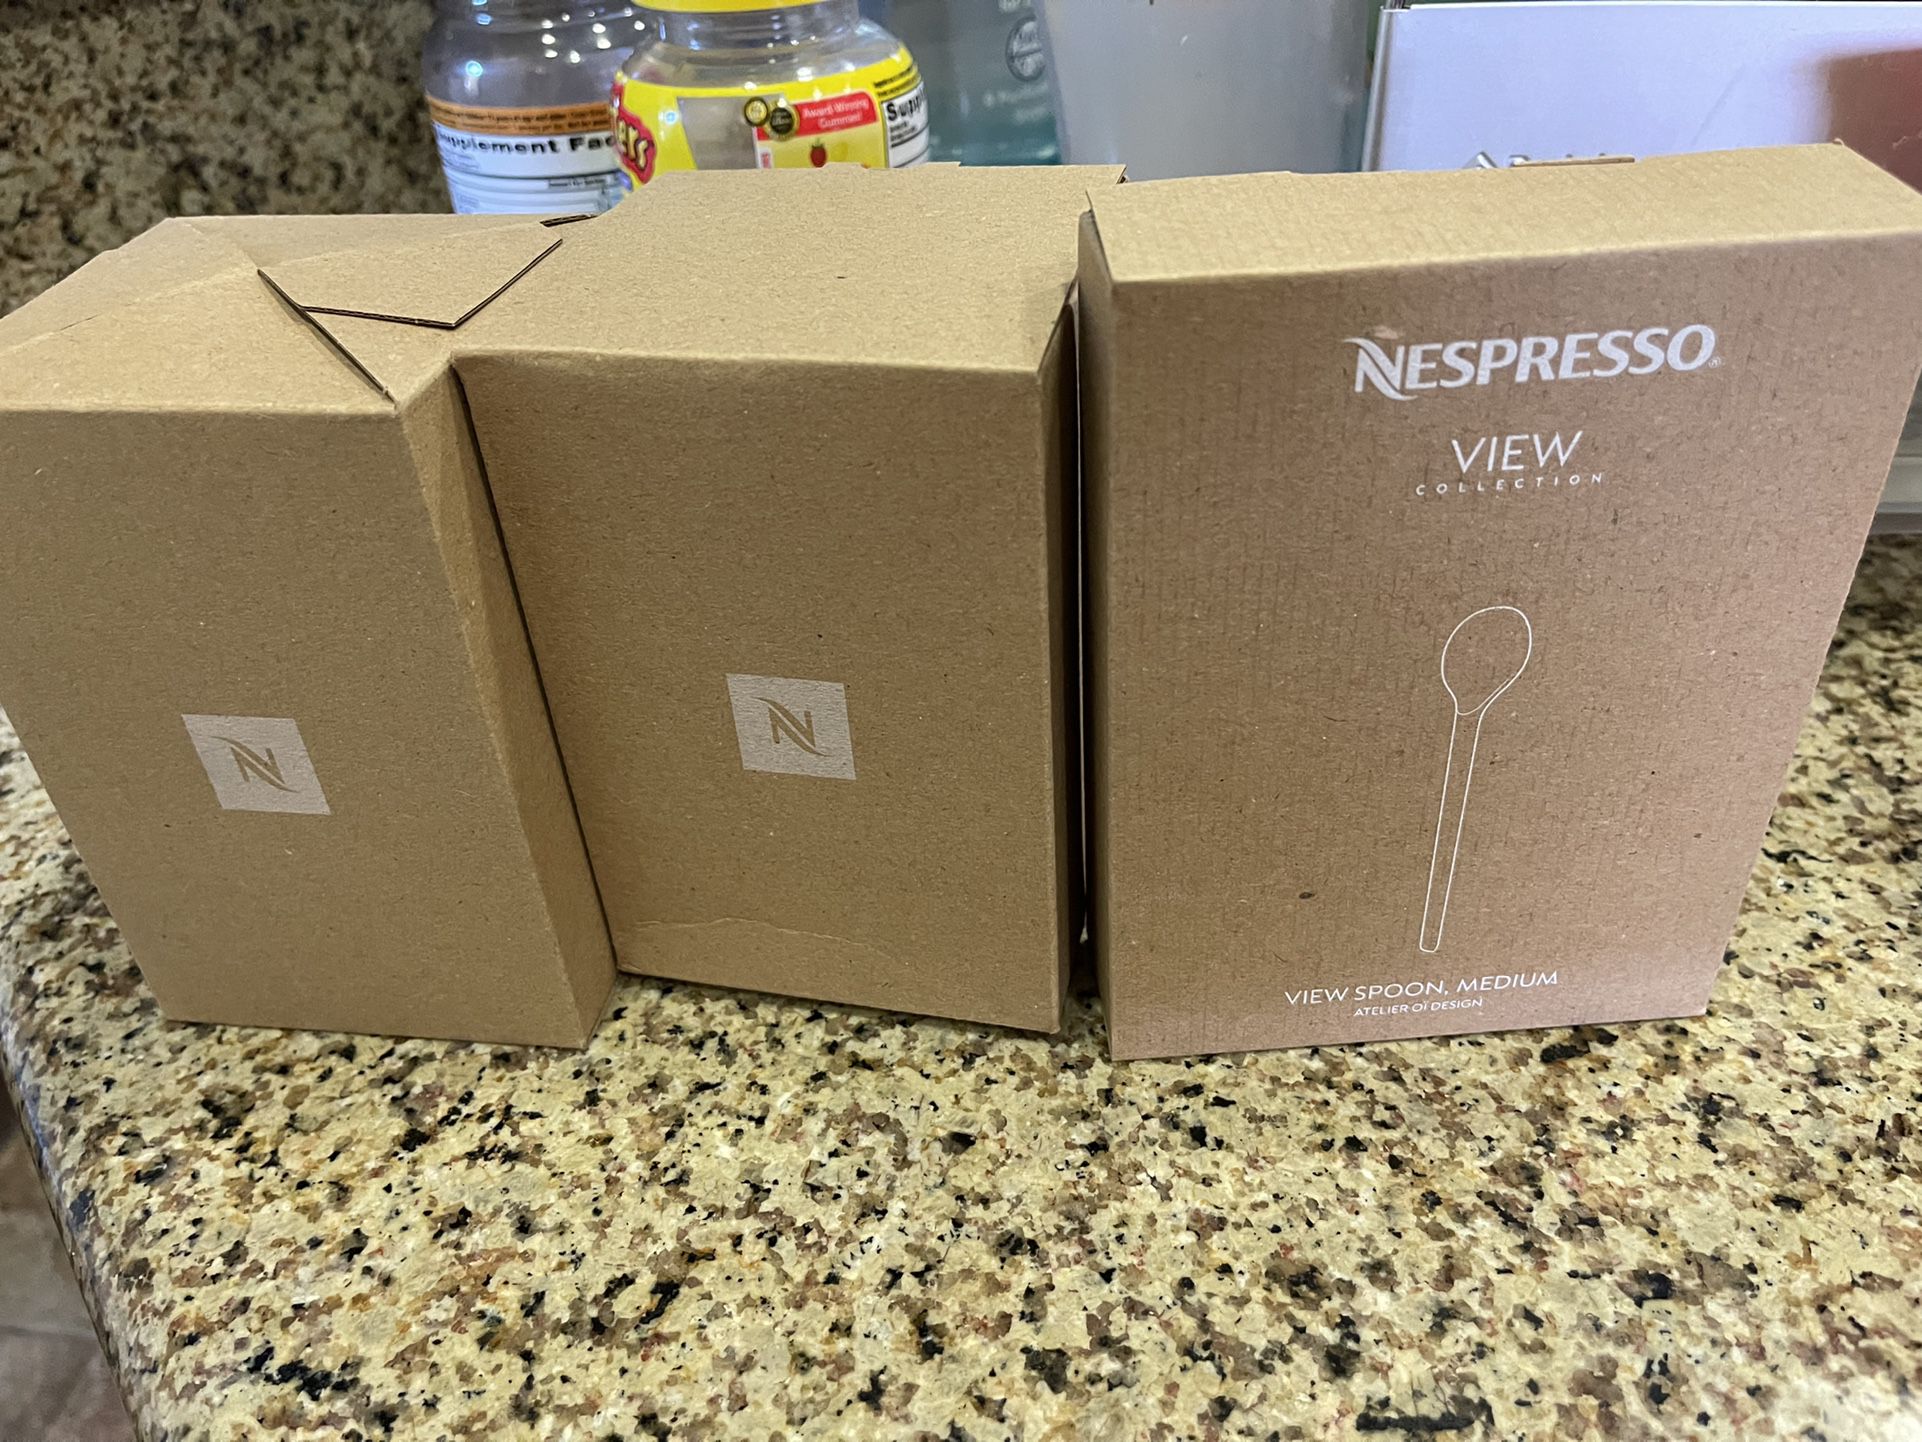 Nespresso Cups And Coffee Spoons